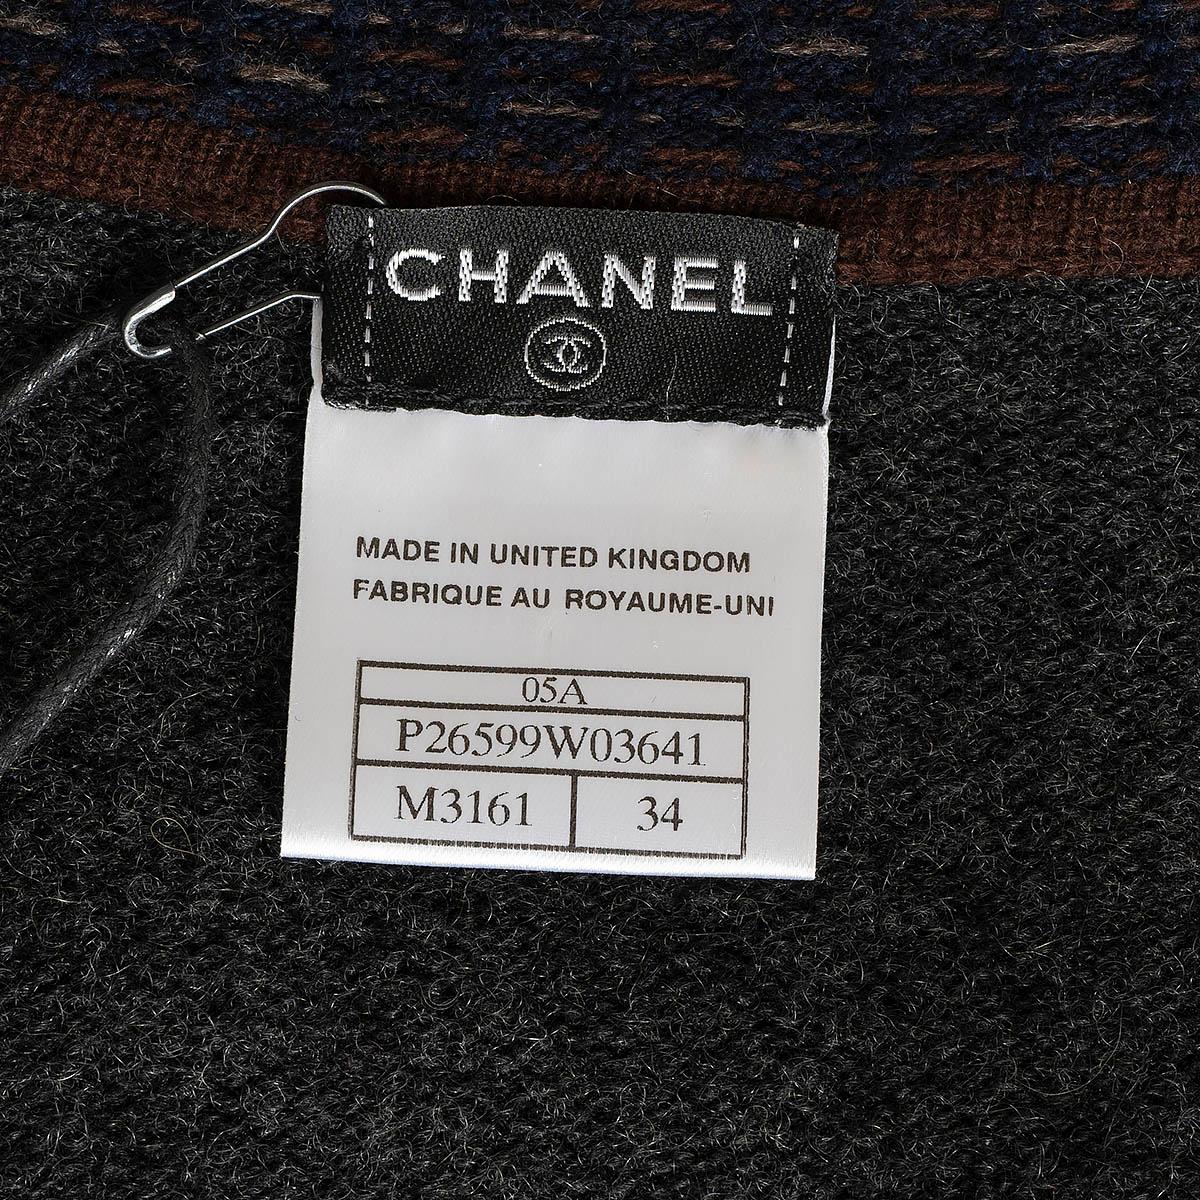 CHANEL grey cashmere 2005 05A CONTRAST TRIM OPEN Cardigan Sweater 34 XS For Sale 5